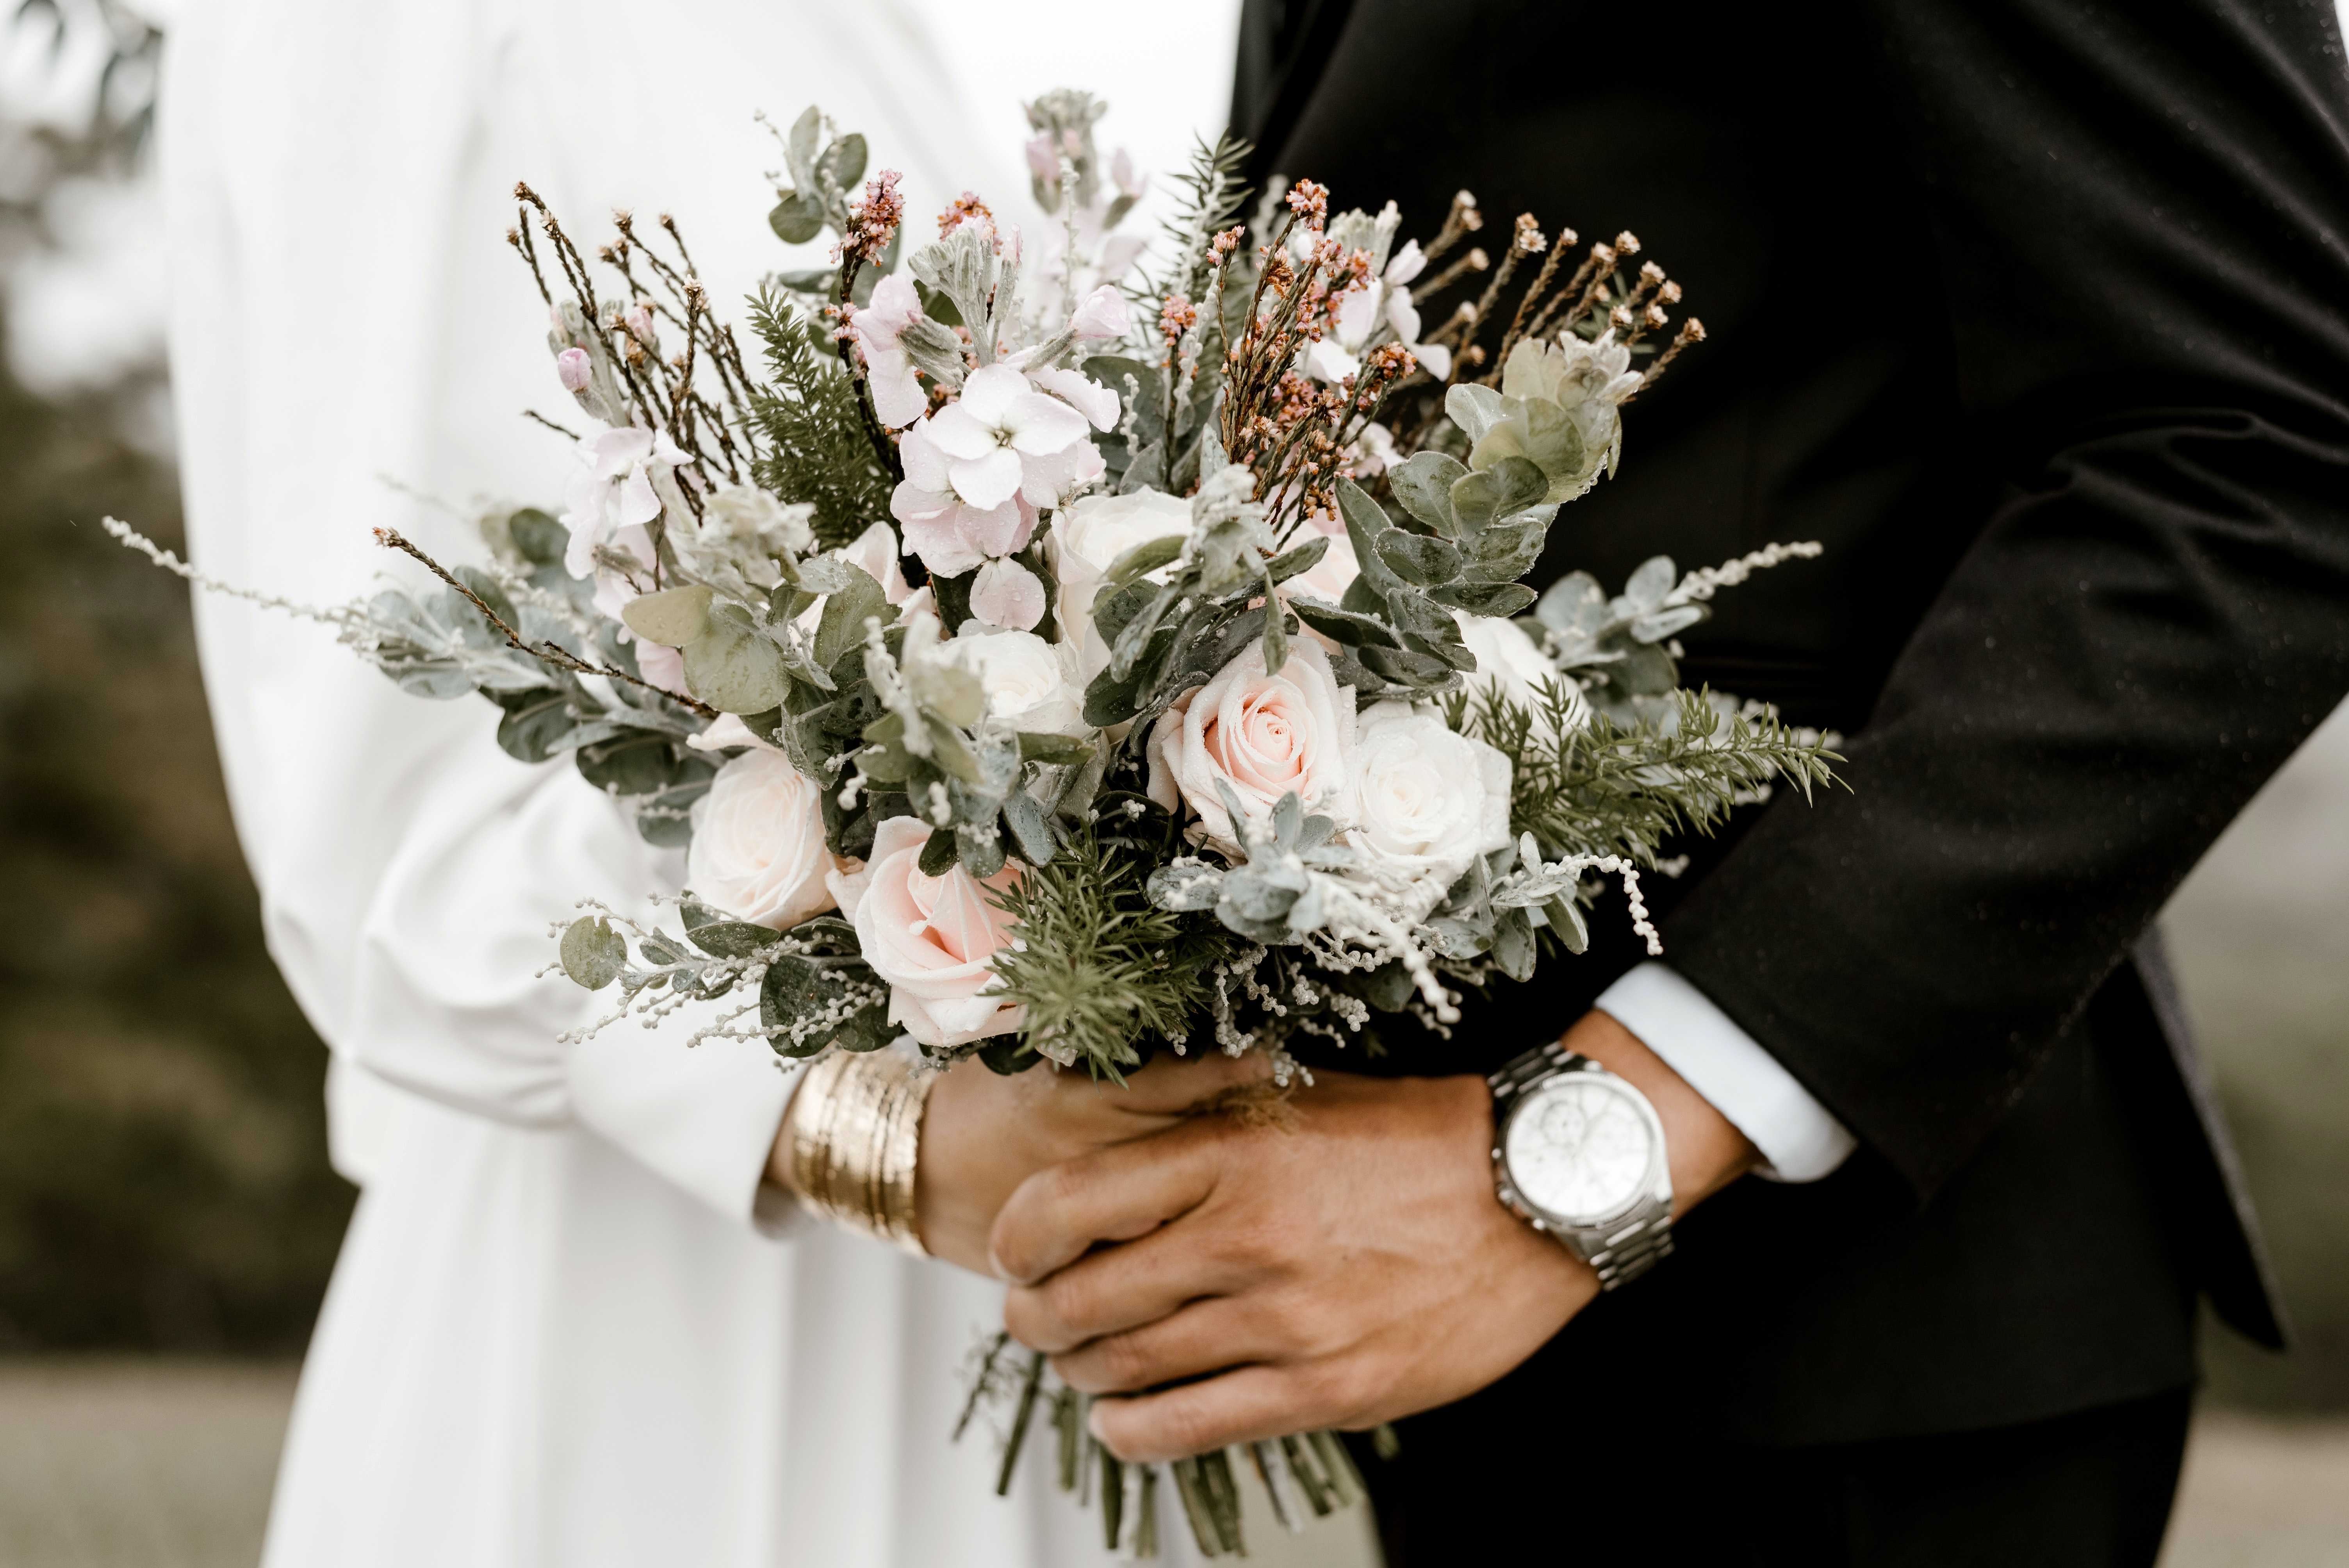 A bride and groom holding a bouquet. | Source: Pexels